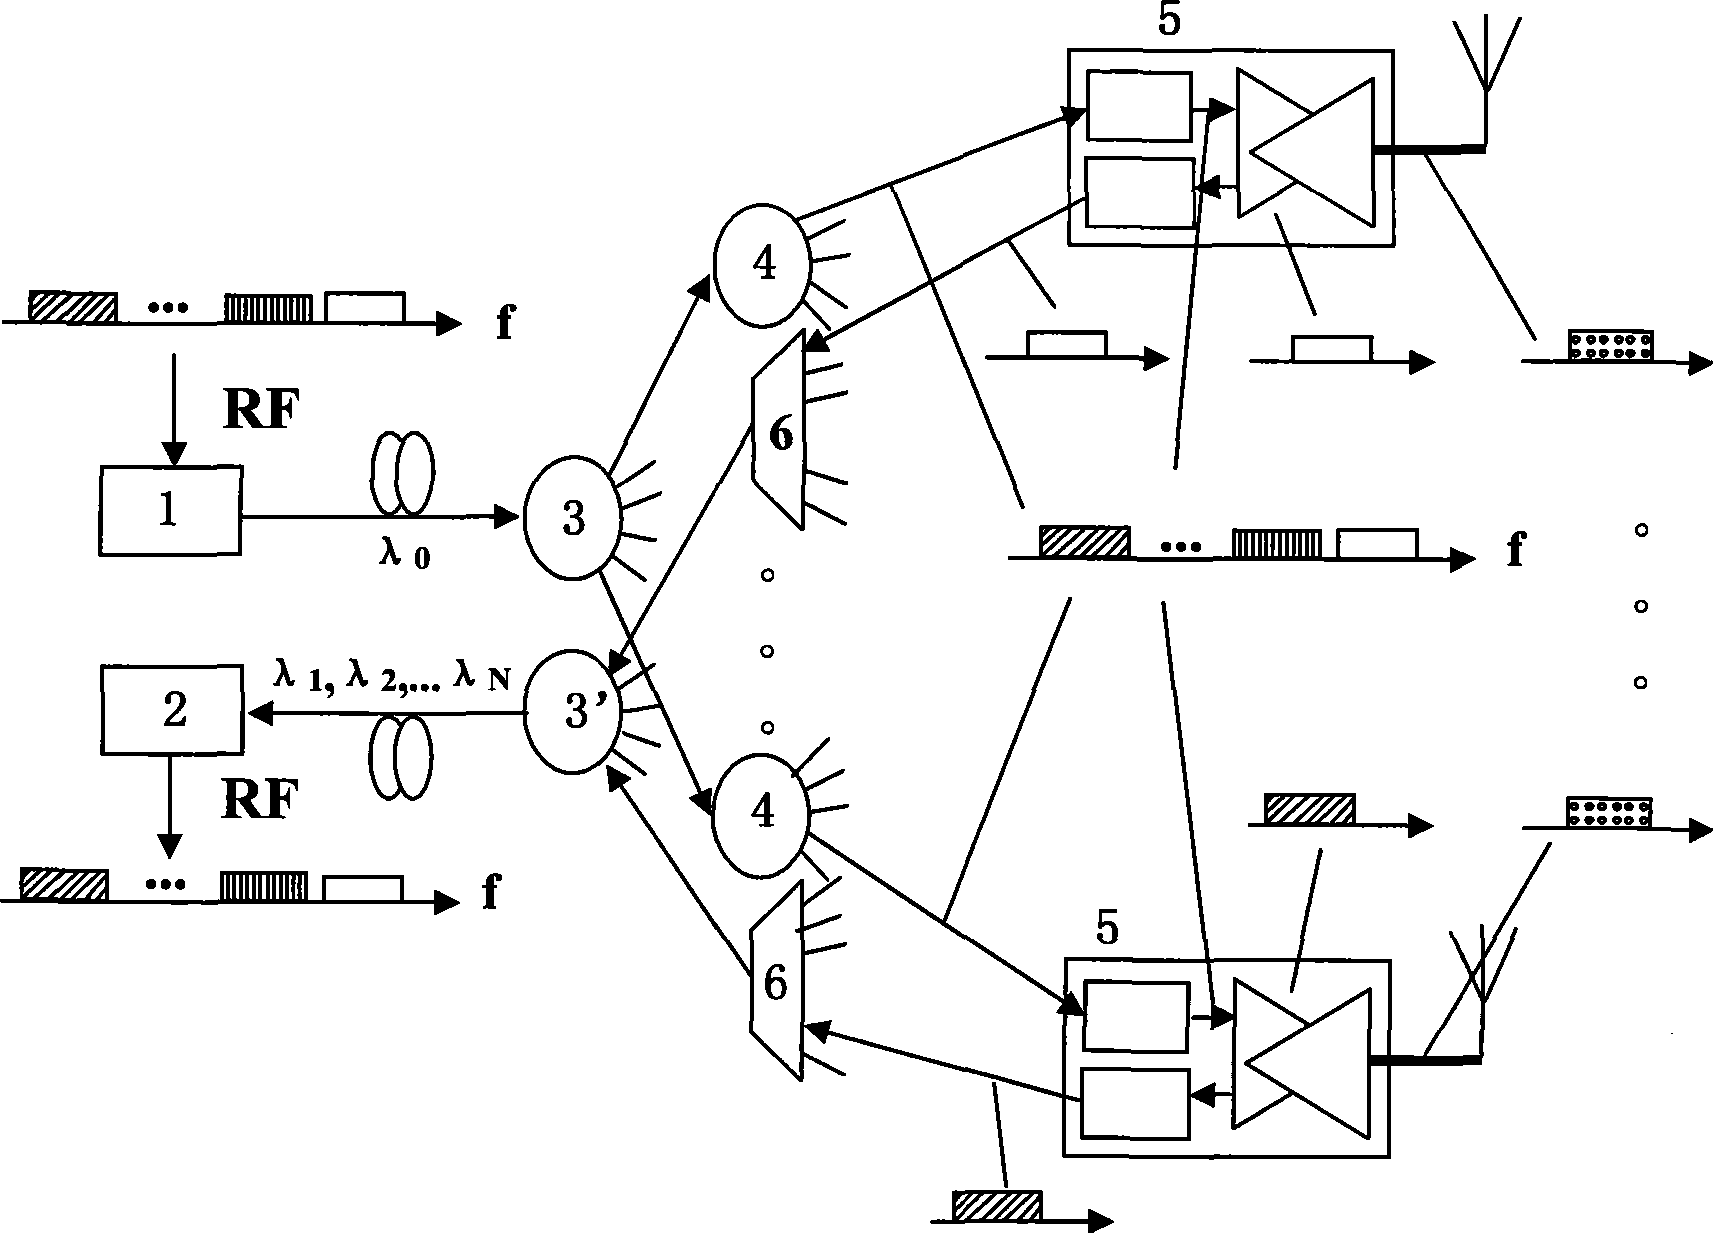 Broadband wireless signal covering network based on passive optical network structure